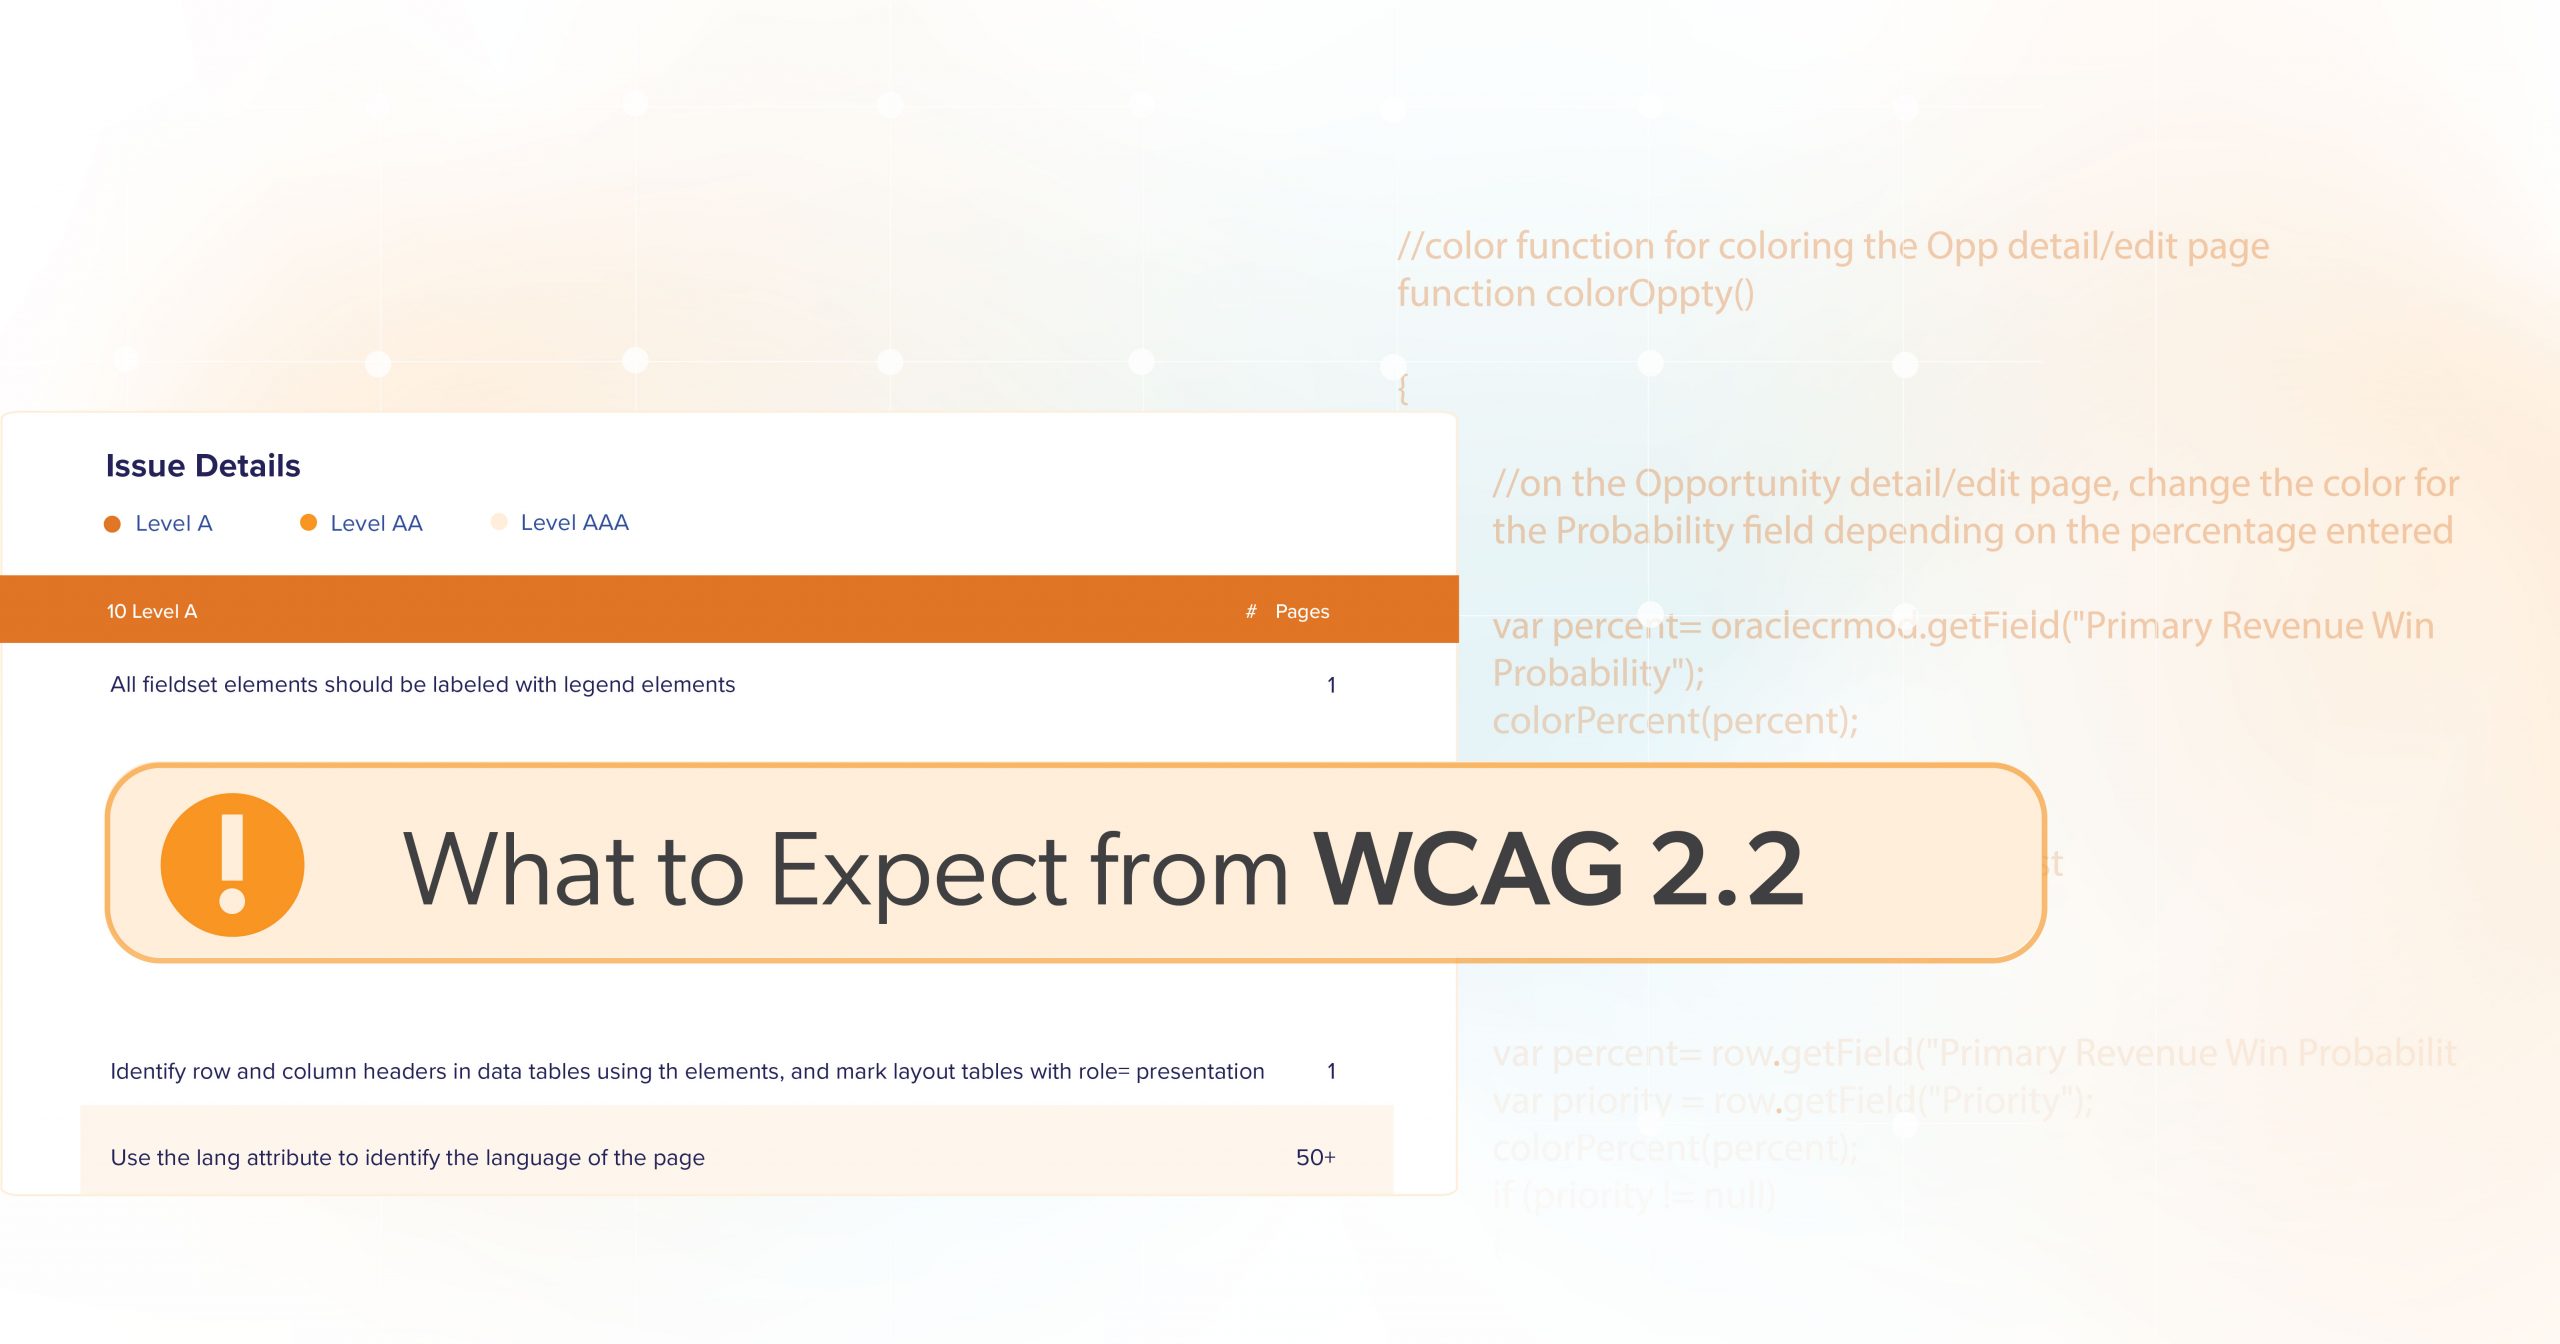 What to Expect from WCAG 2.2